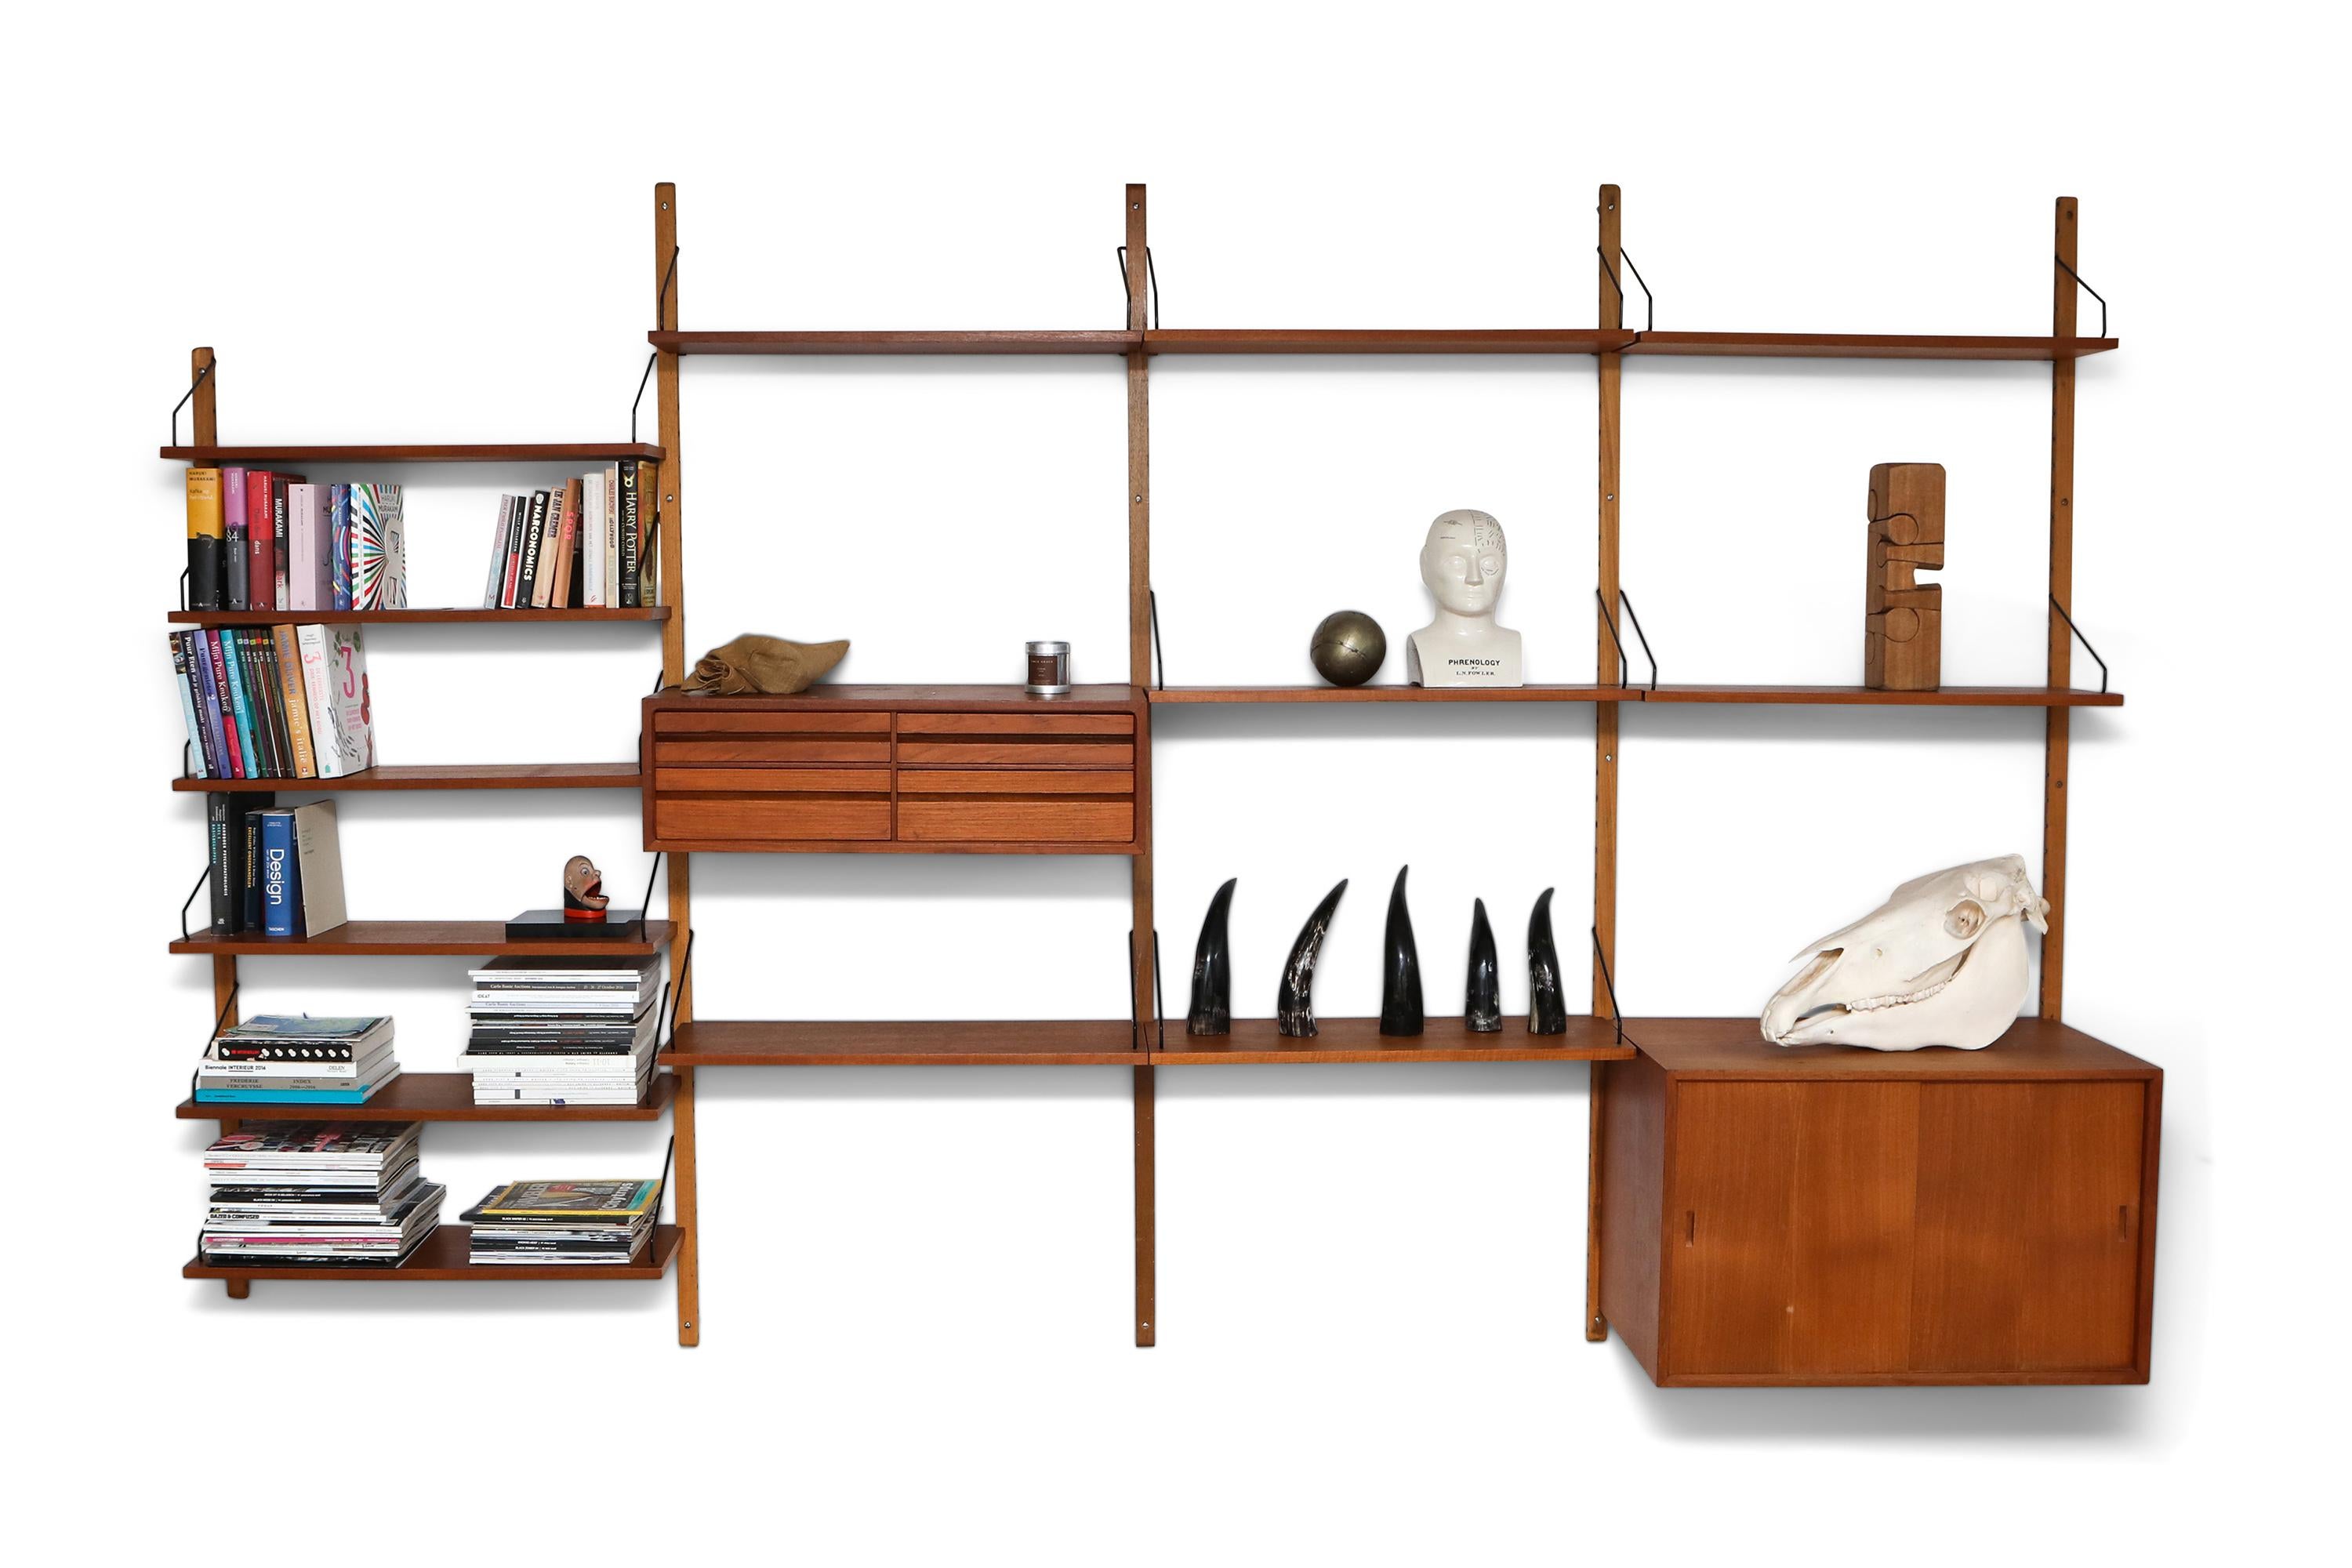 Poul Cadovius 'Royal System' wall unit

Nice variation of wide and small size shelving unit
one storage unit and one four drawer unit included.